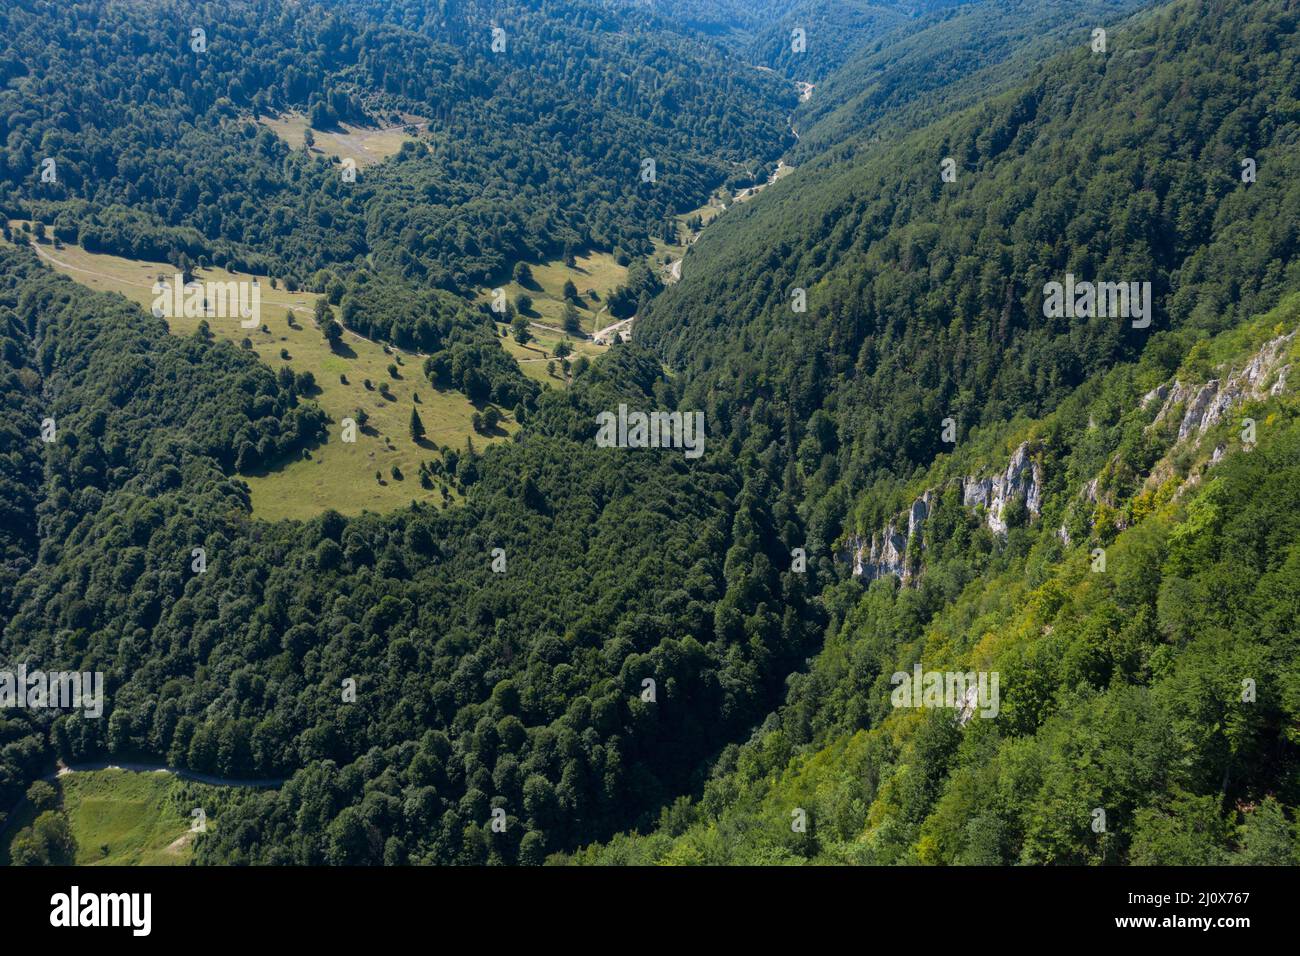 Flying above a deep valley and deciduous forest and limestone cliffs. Aerial shot by drone. Iada valley, Apuseni mountains, Romania Stock Photo